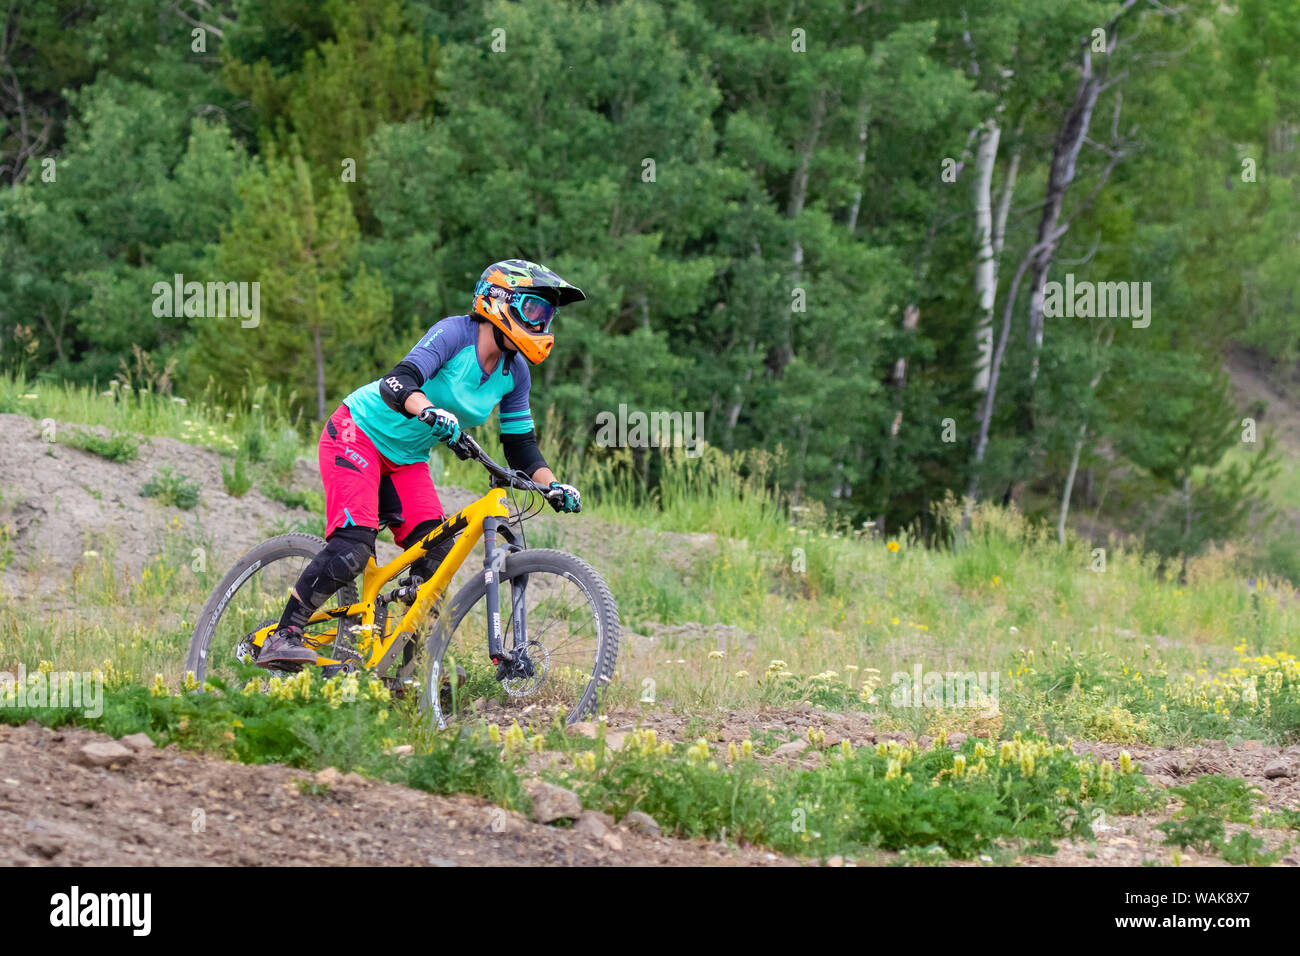 Biking on a downhill trail. (Editorial Use Only) Stock Photo